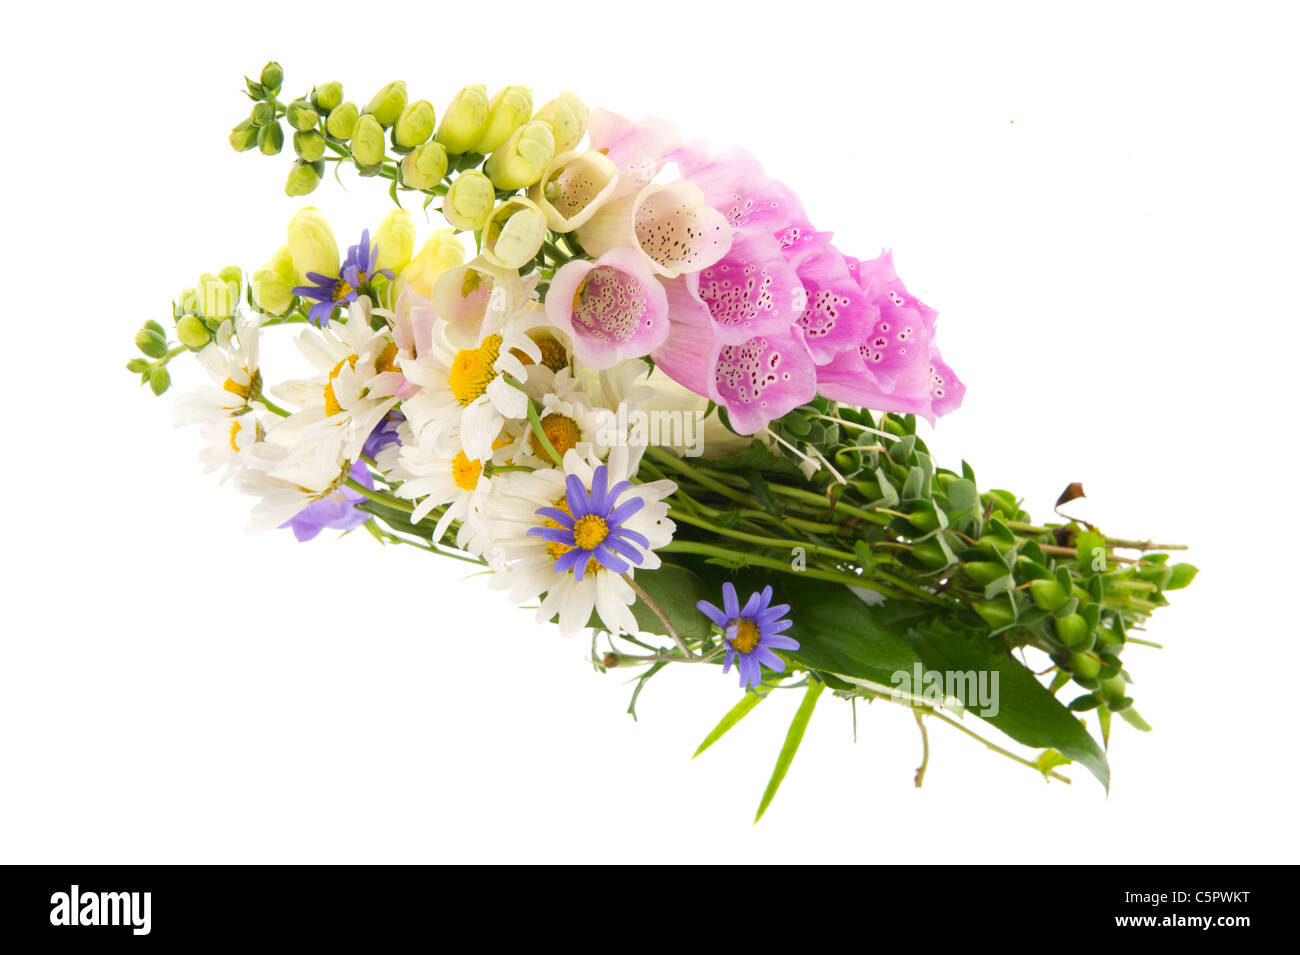 Purple Foxglove flowers and other wild flowers in bouquet Stock Photo